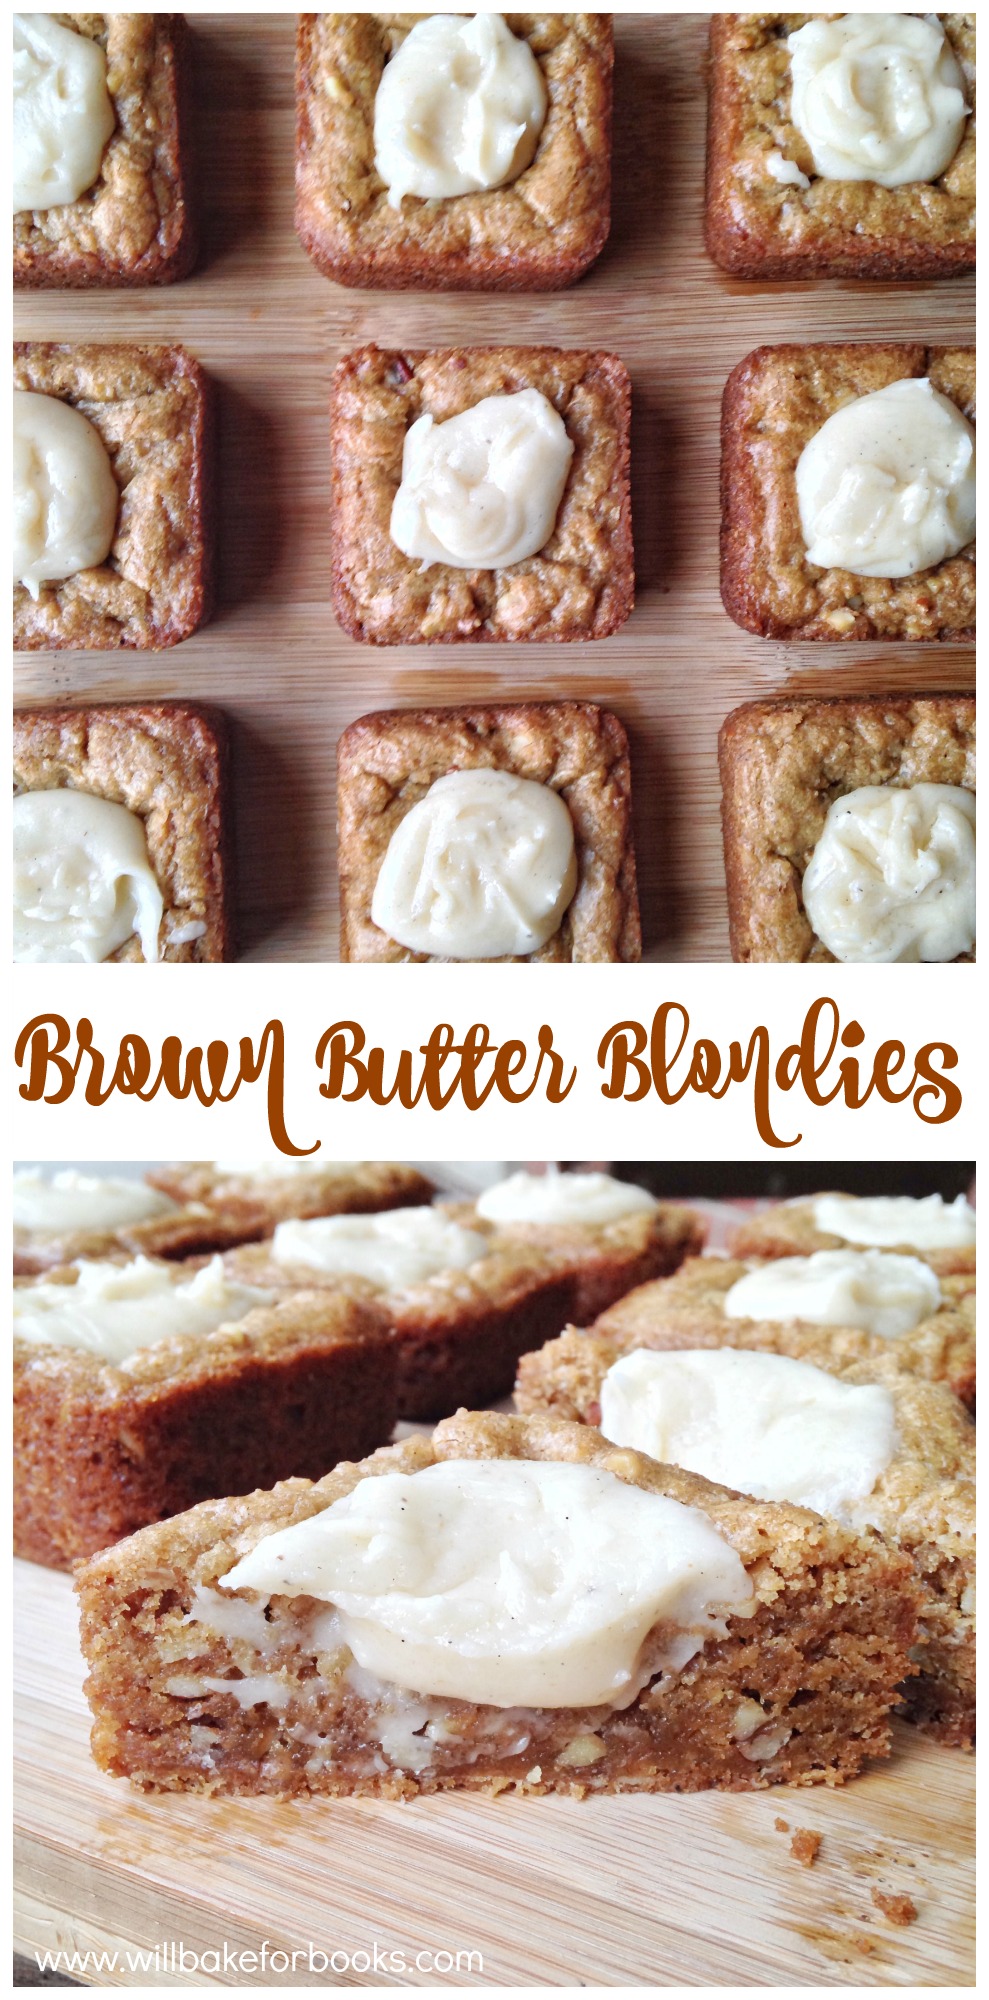 Brown Butter Blondies with Brown Butter Frosting on willbakeforbooks.com